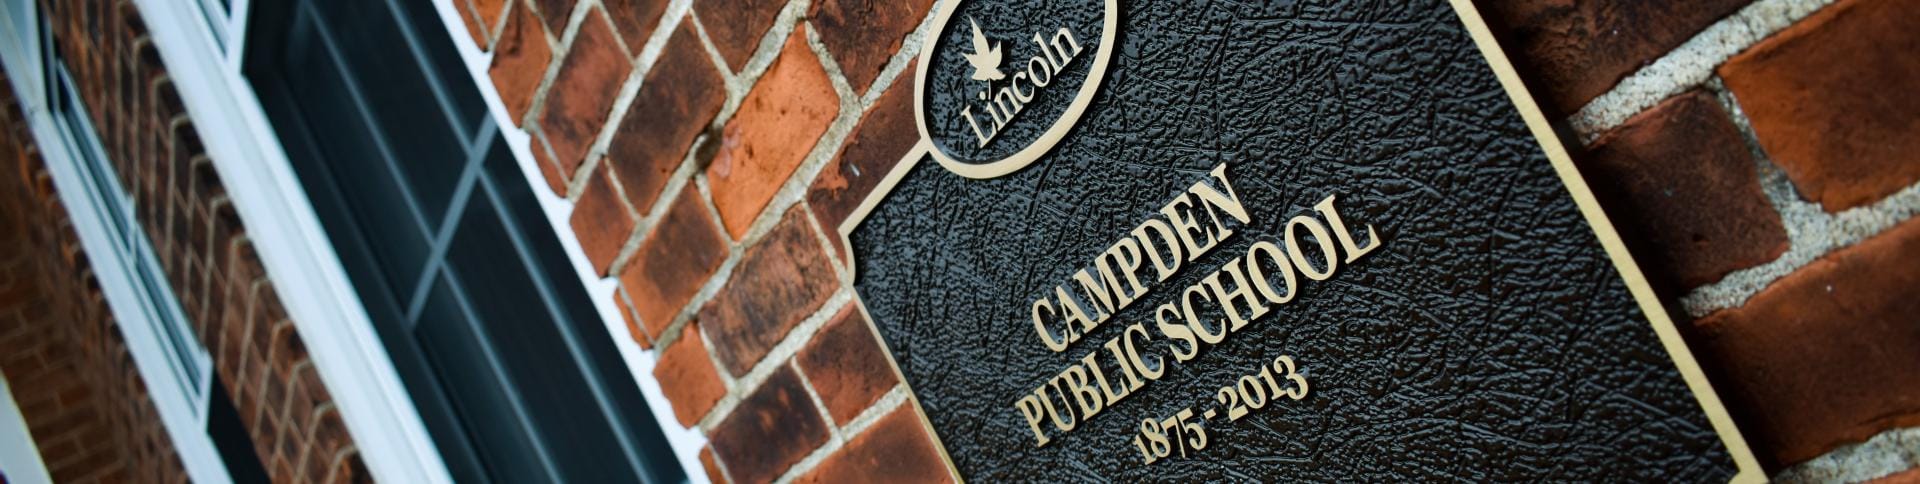 Plaque on a brick wall that reads "Campden Public School"